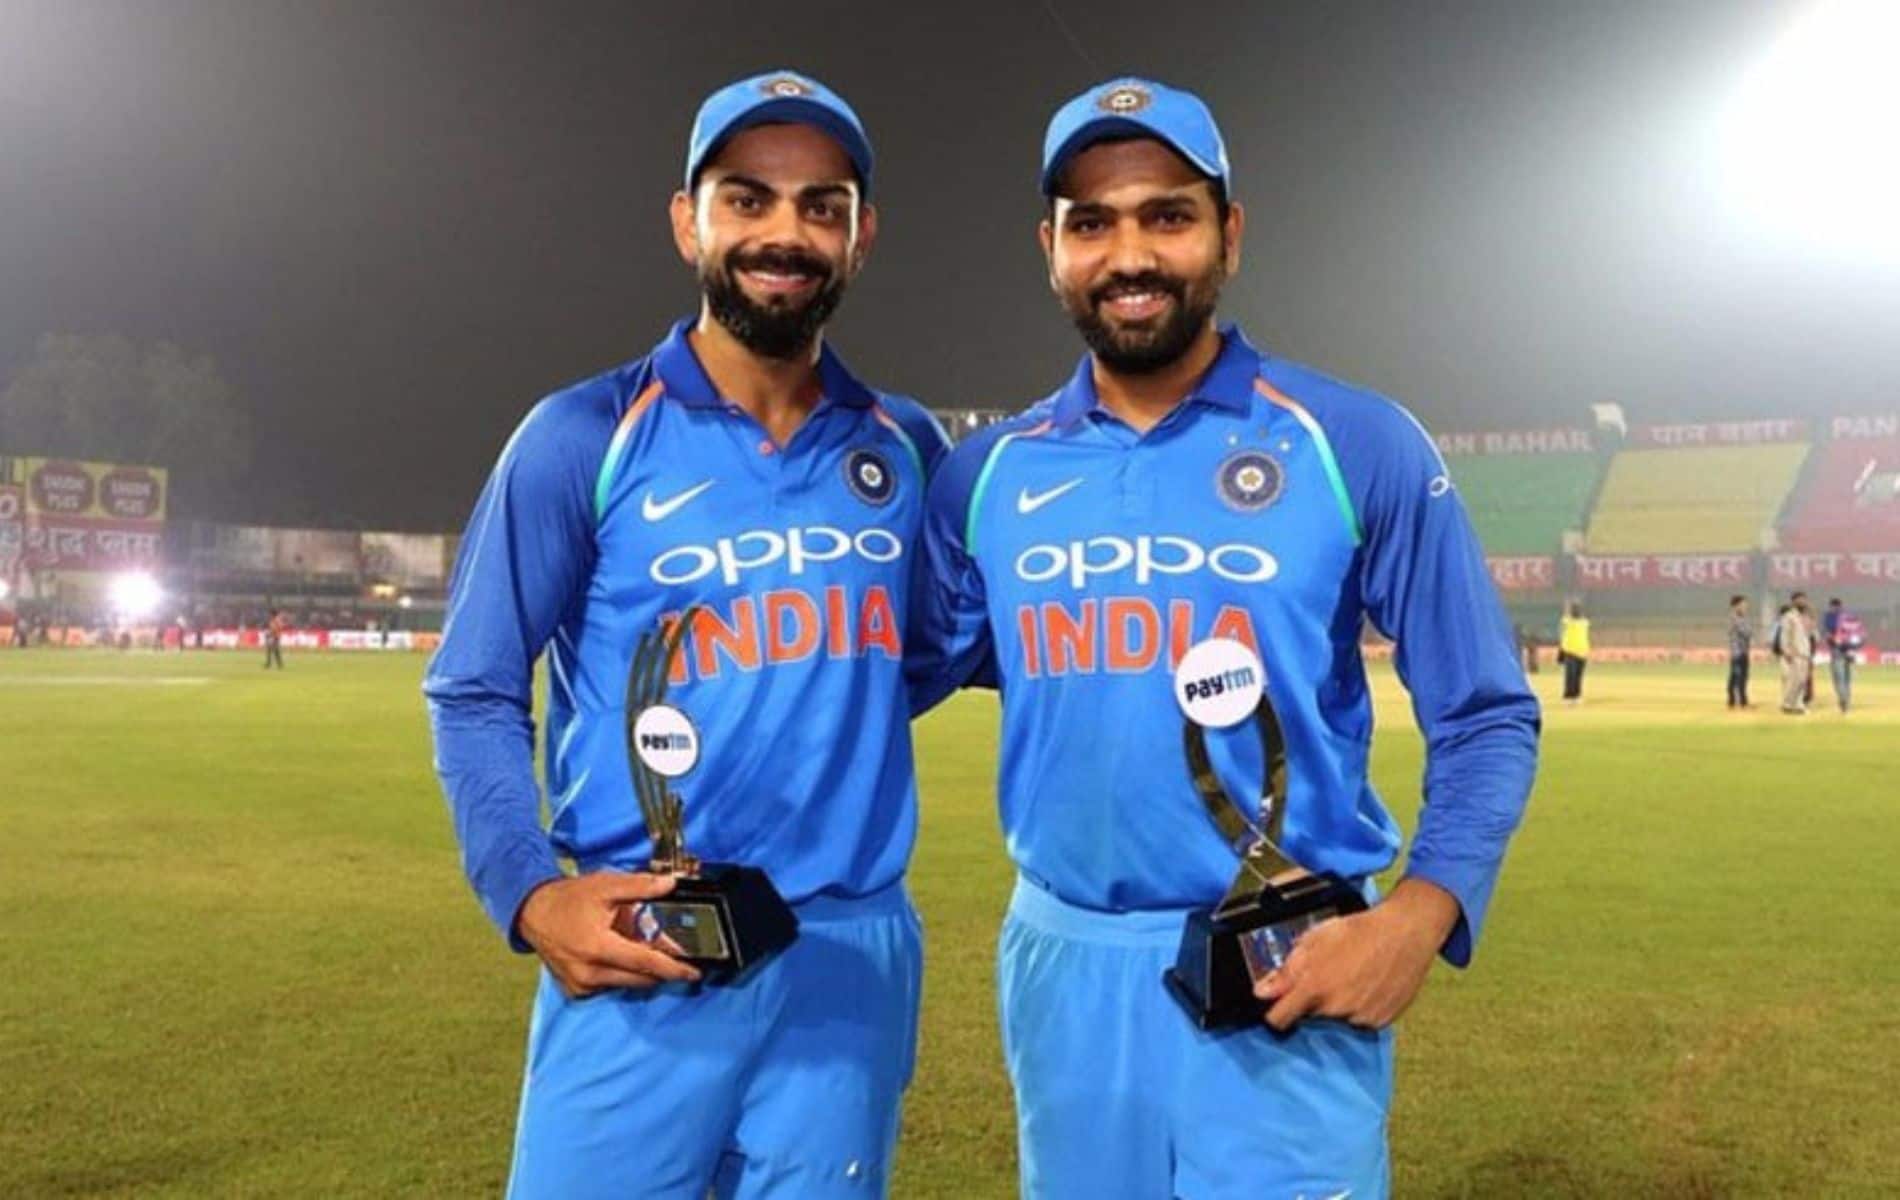 Rohit and Kohli could open for India in T20 World Cup (X)